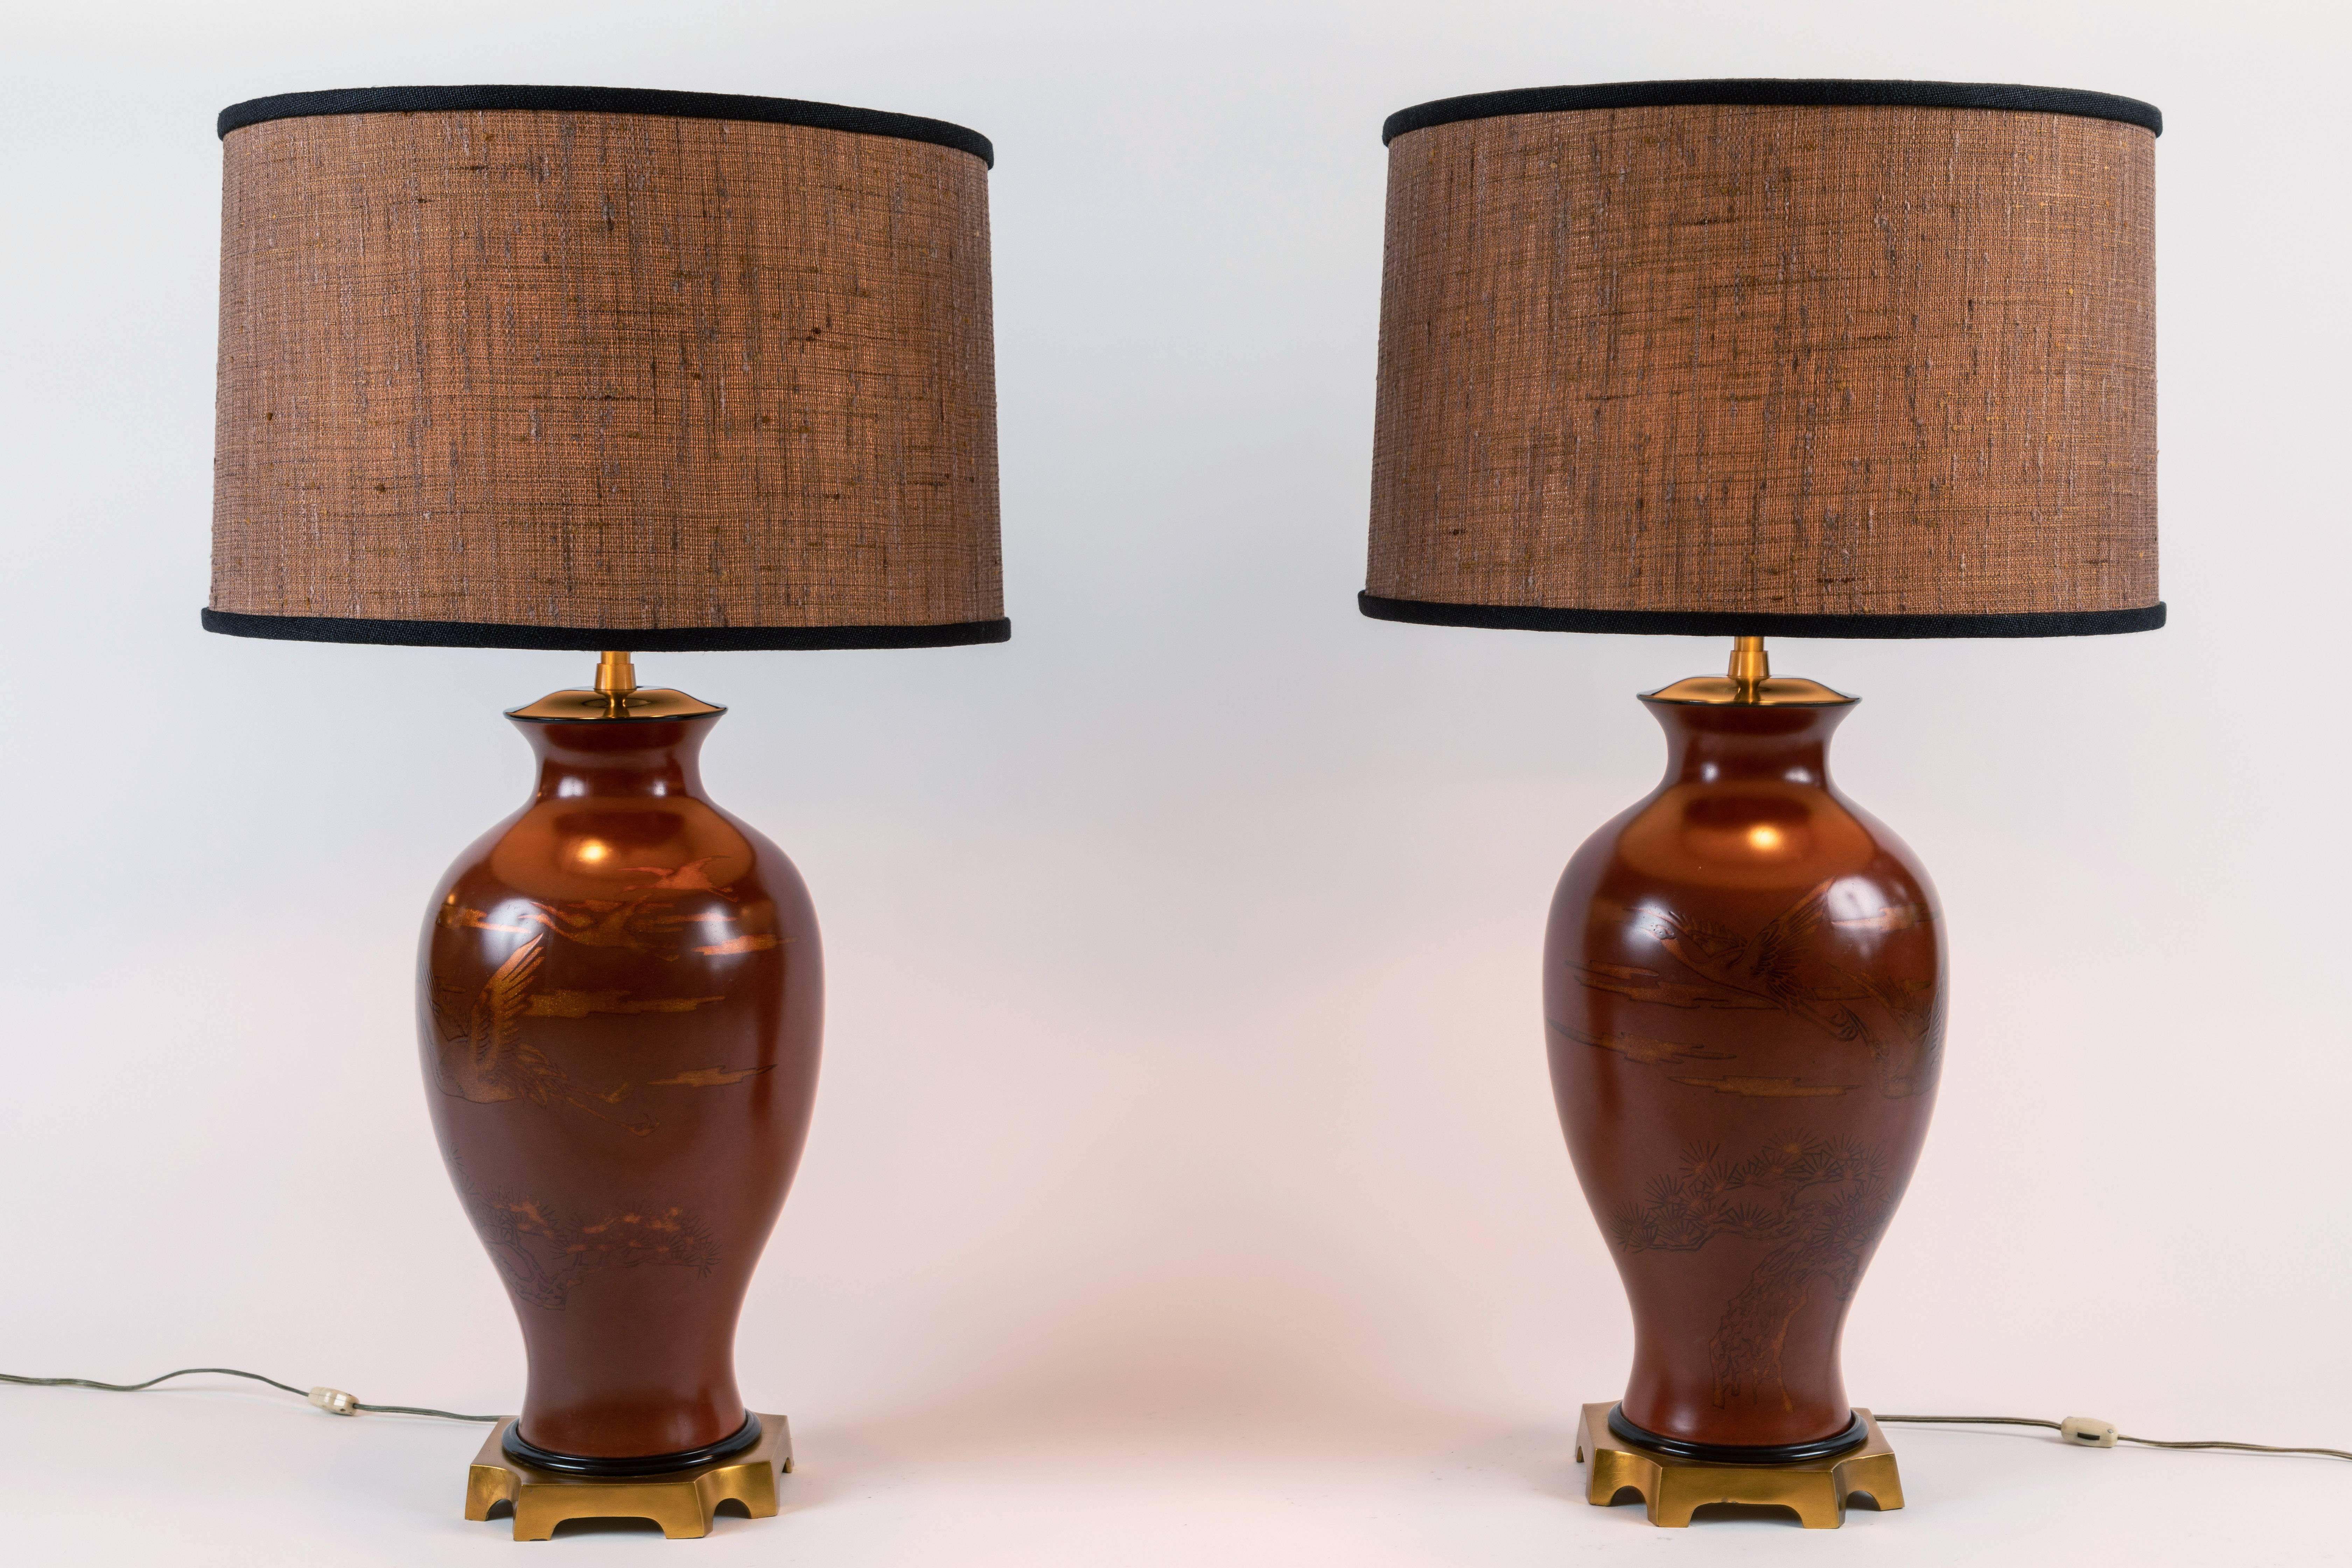 Pair of Japanese or Chinoiserie Style Urn Table Lamps by Marbro Lamp Company 2